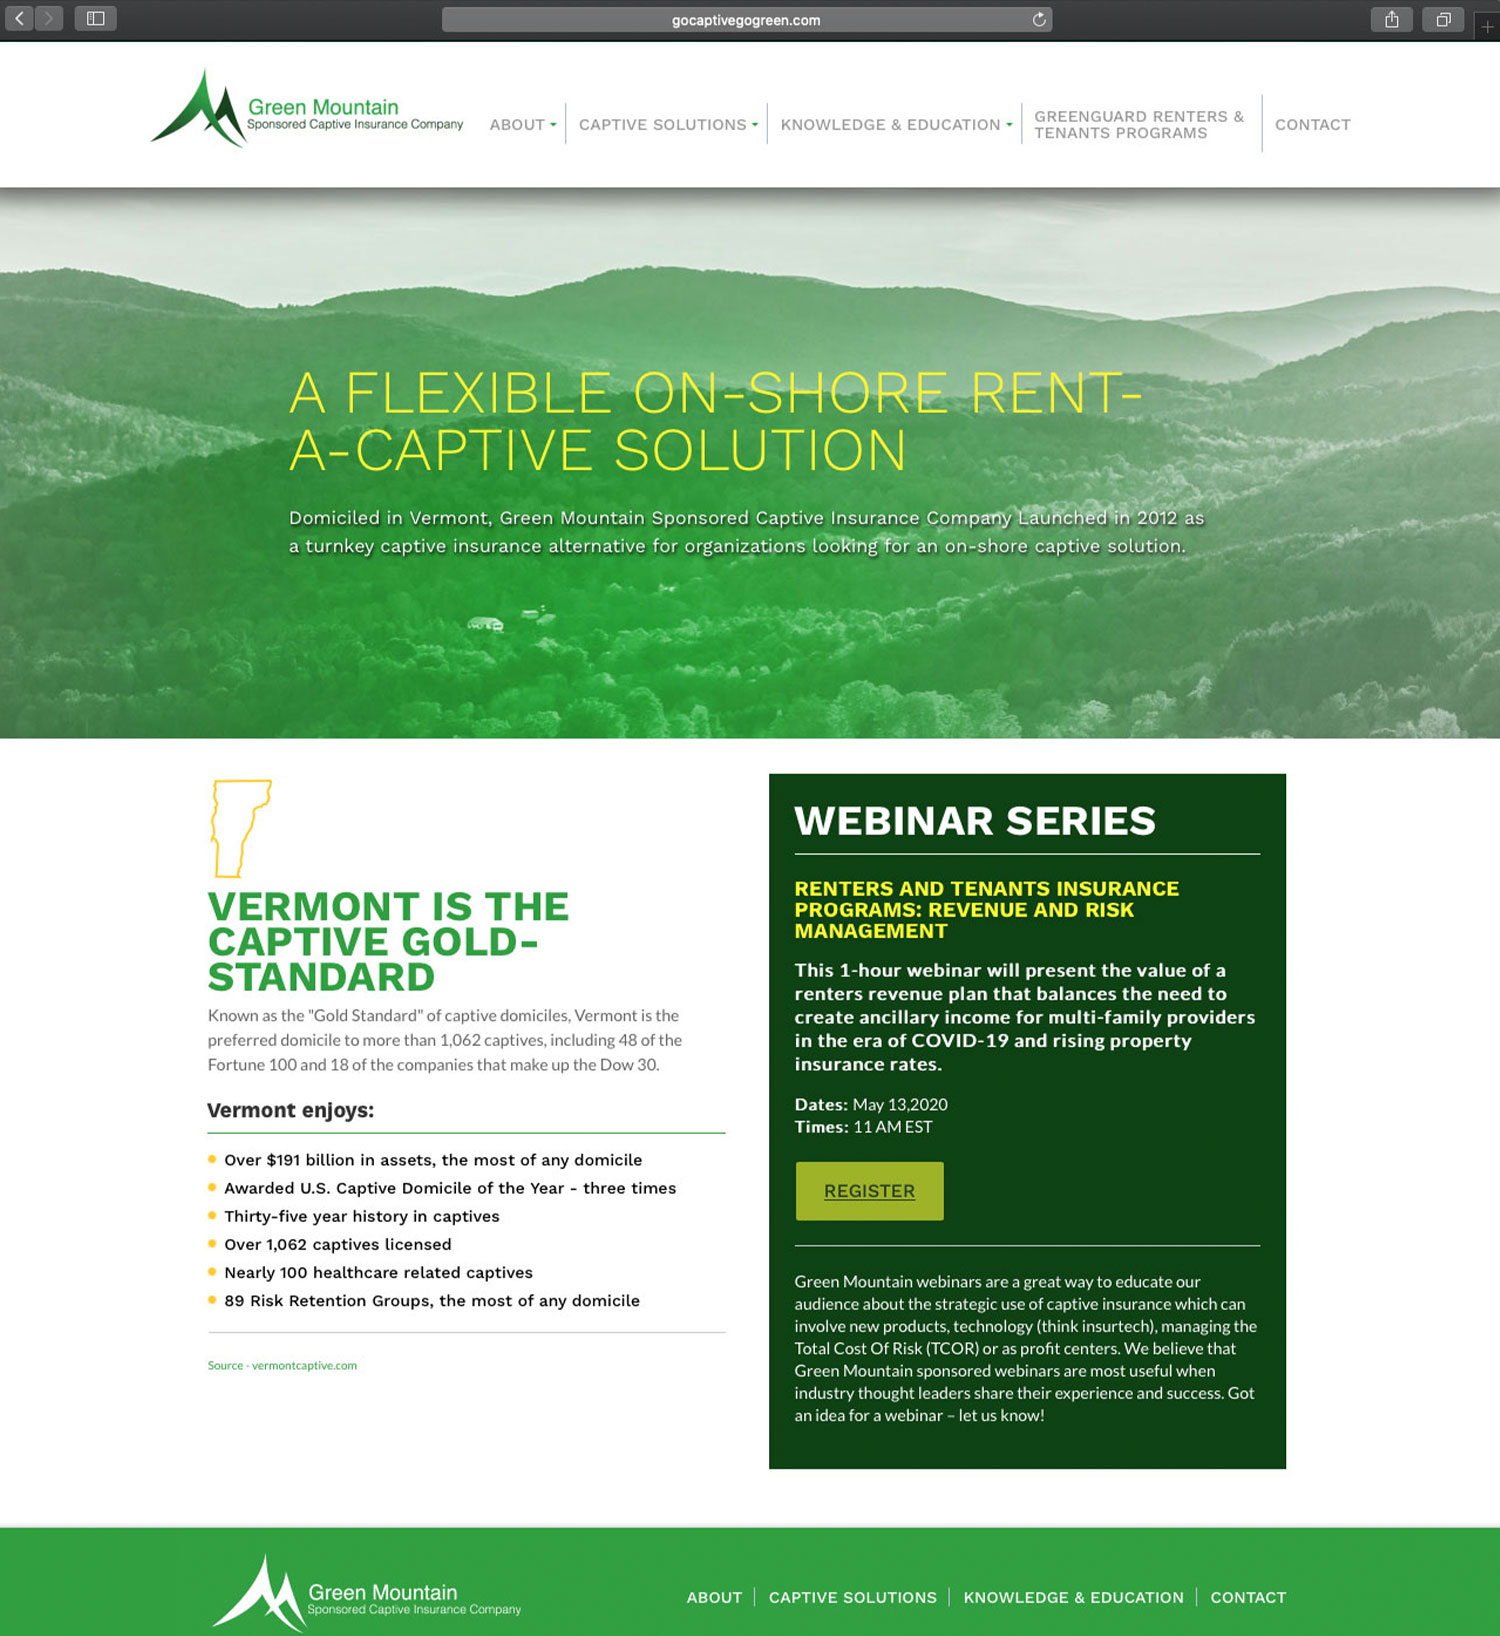 Website design and website development for Green Mt. Captive - homepage view.